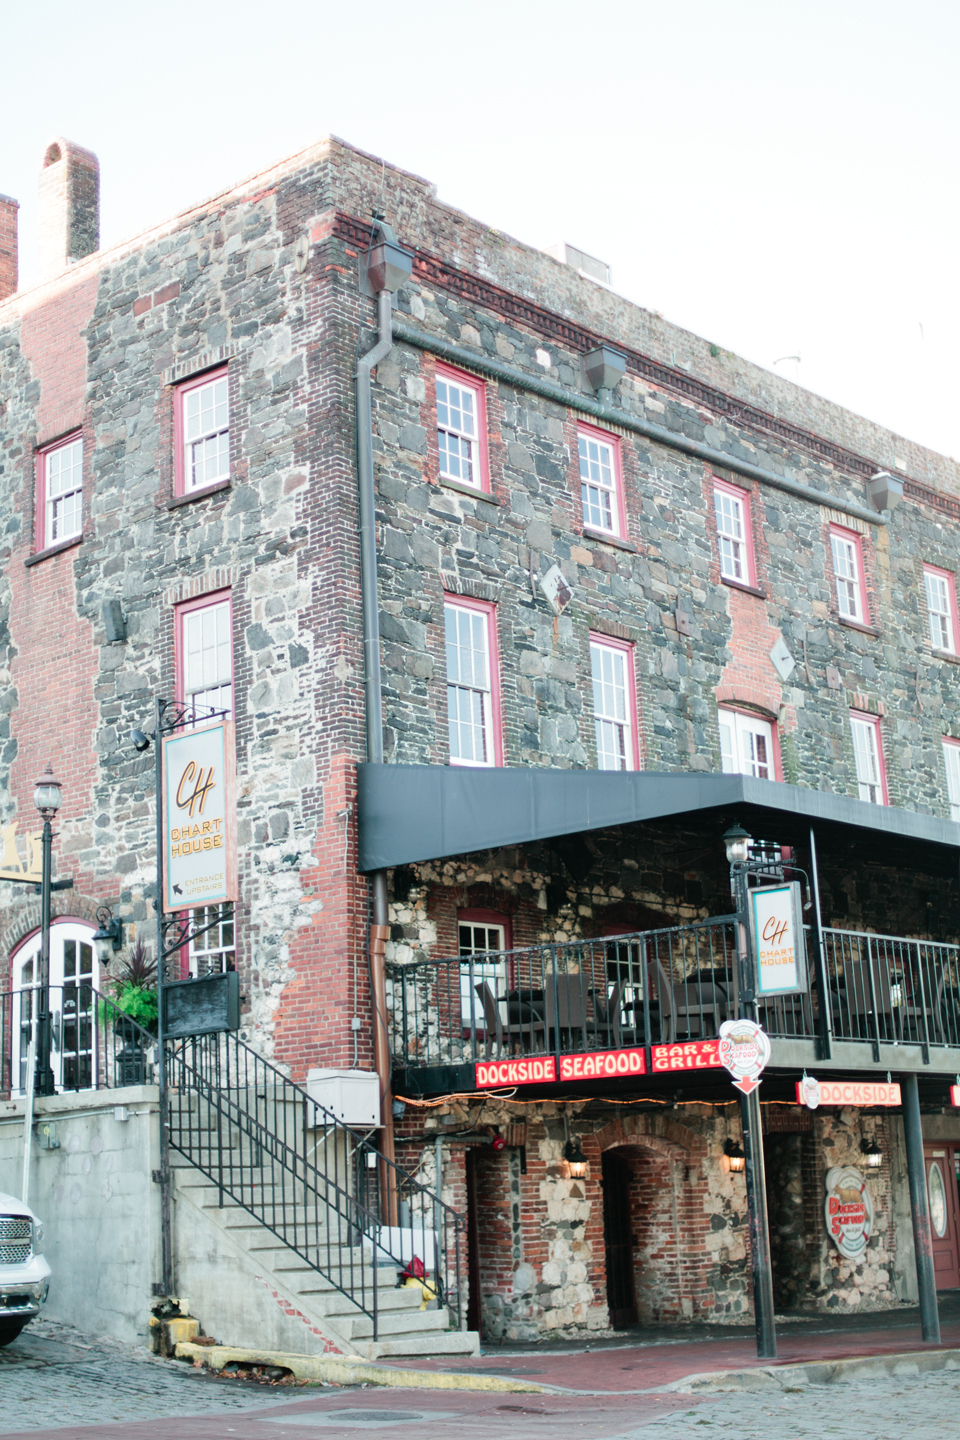 Image of buildings on East River Street in downtown historic Savannah, Georgia.  This is a four story stone building with steps.